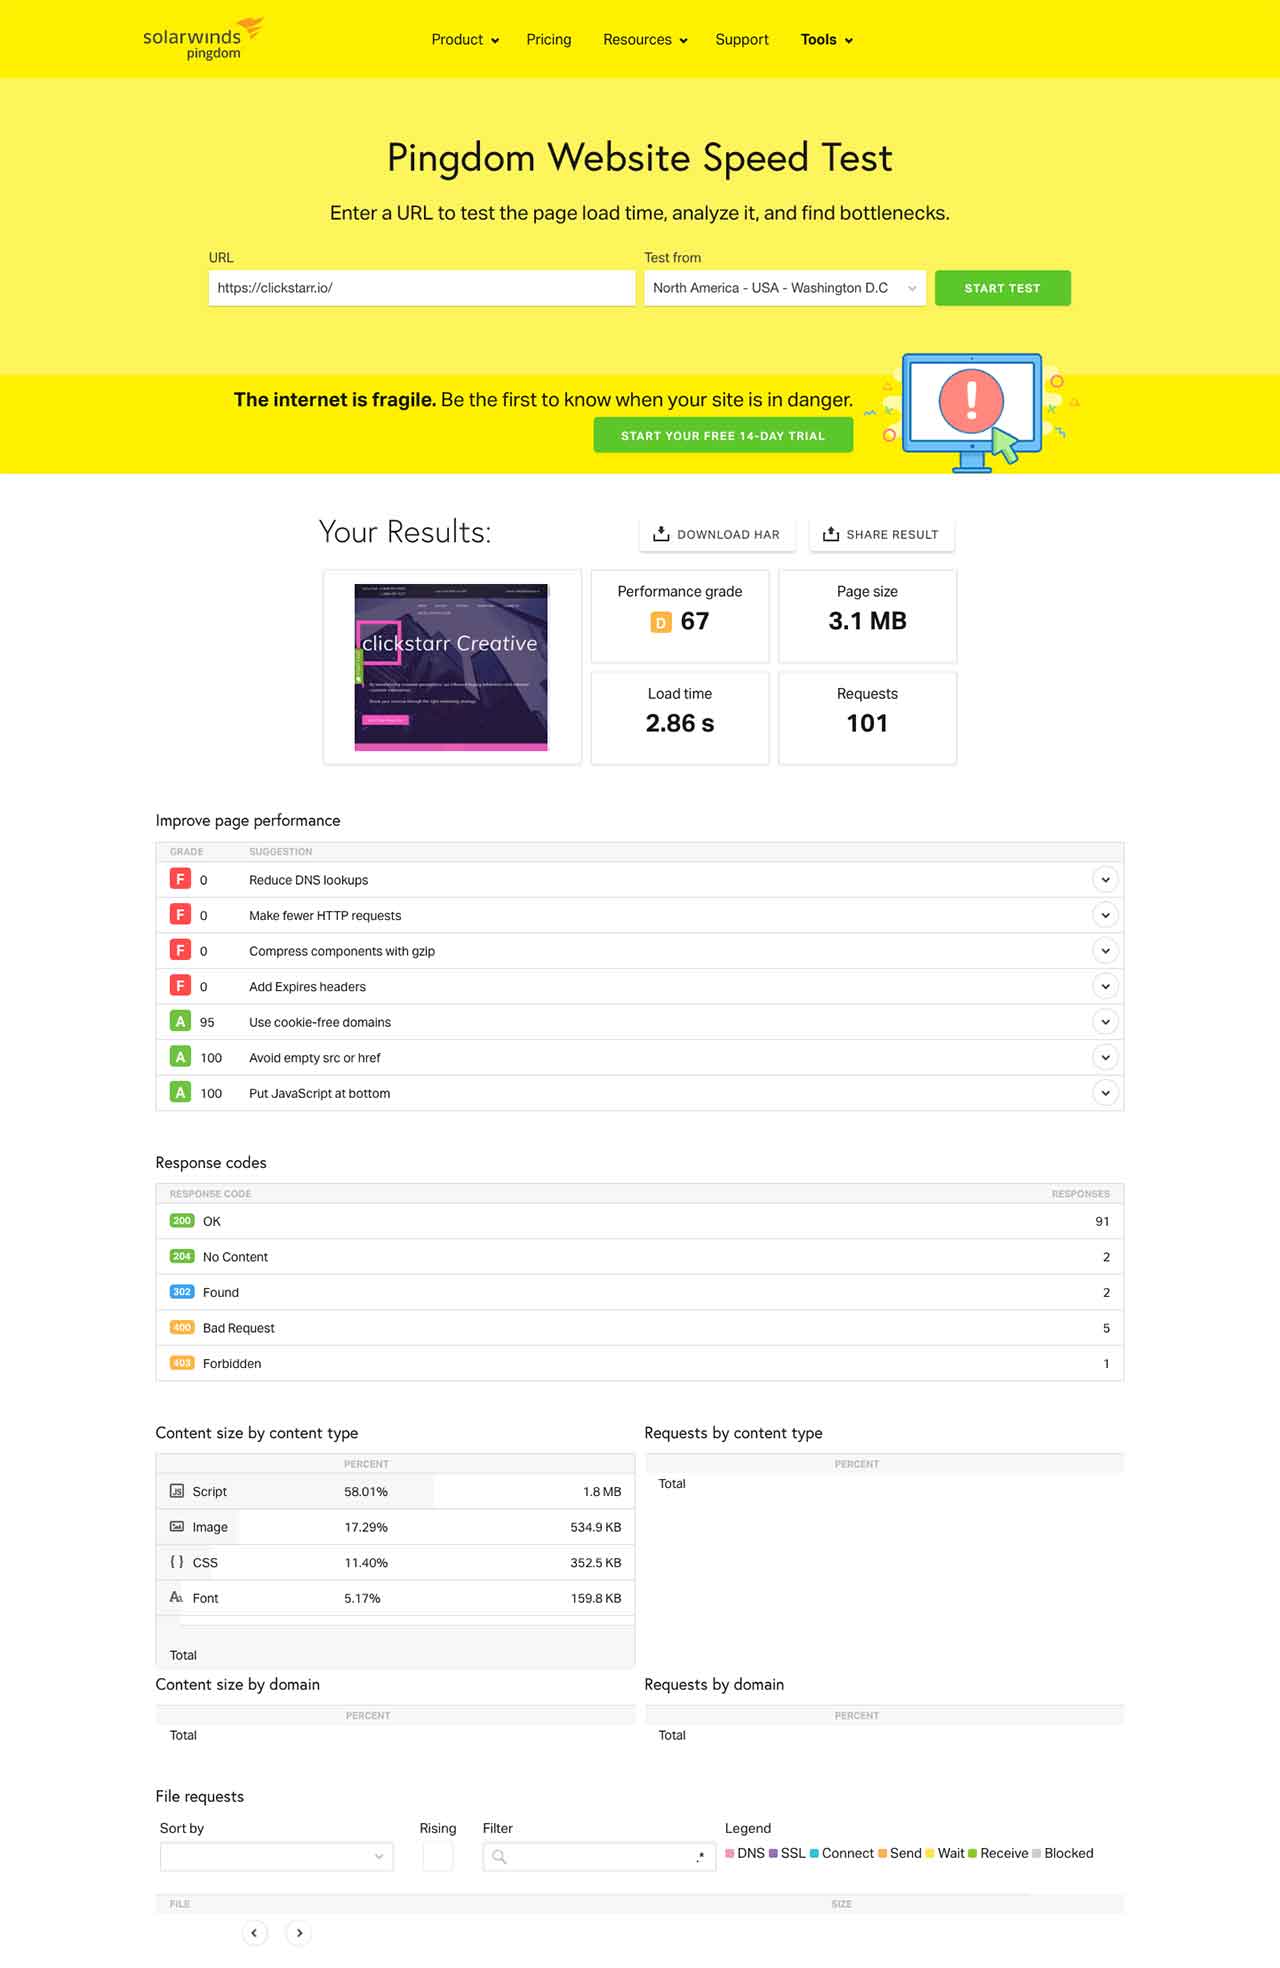 example of pingdom website performance results